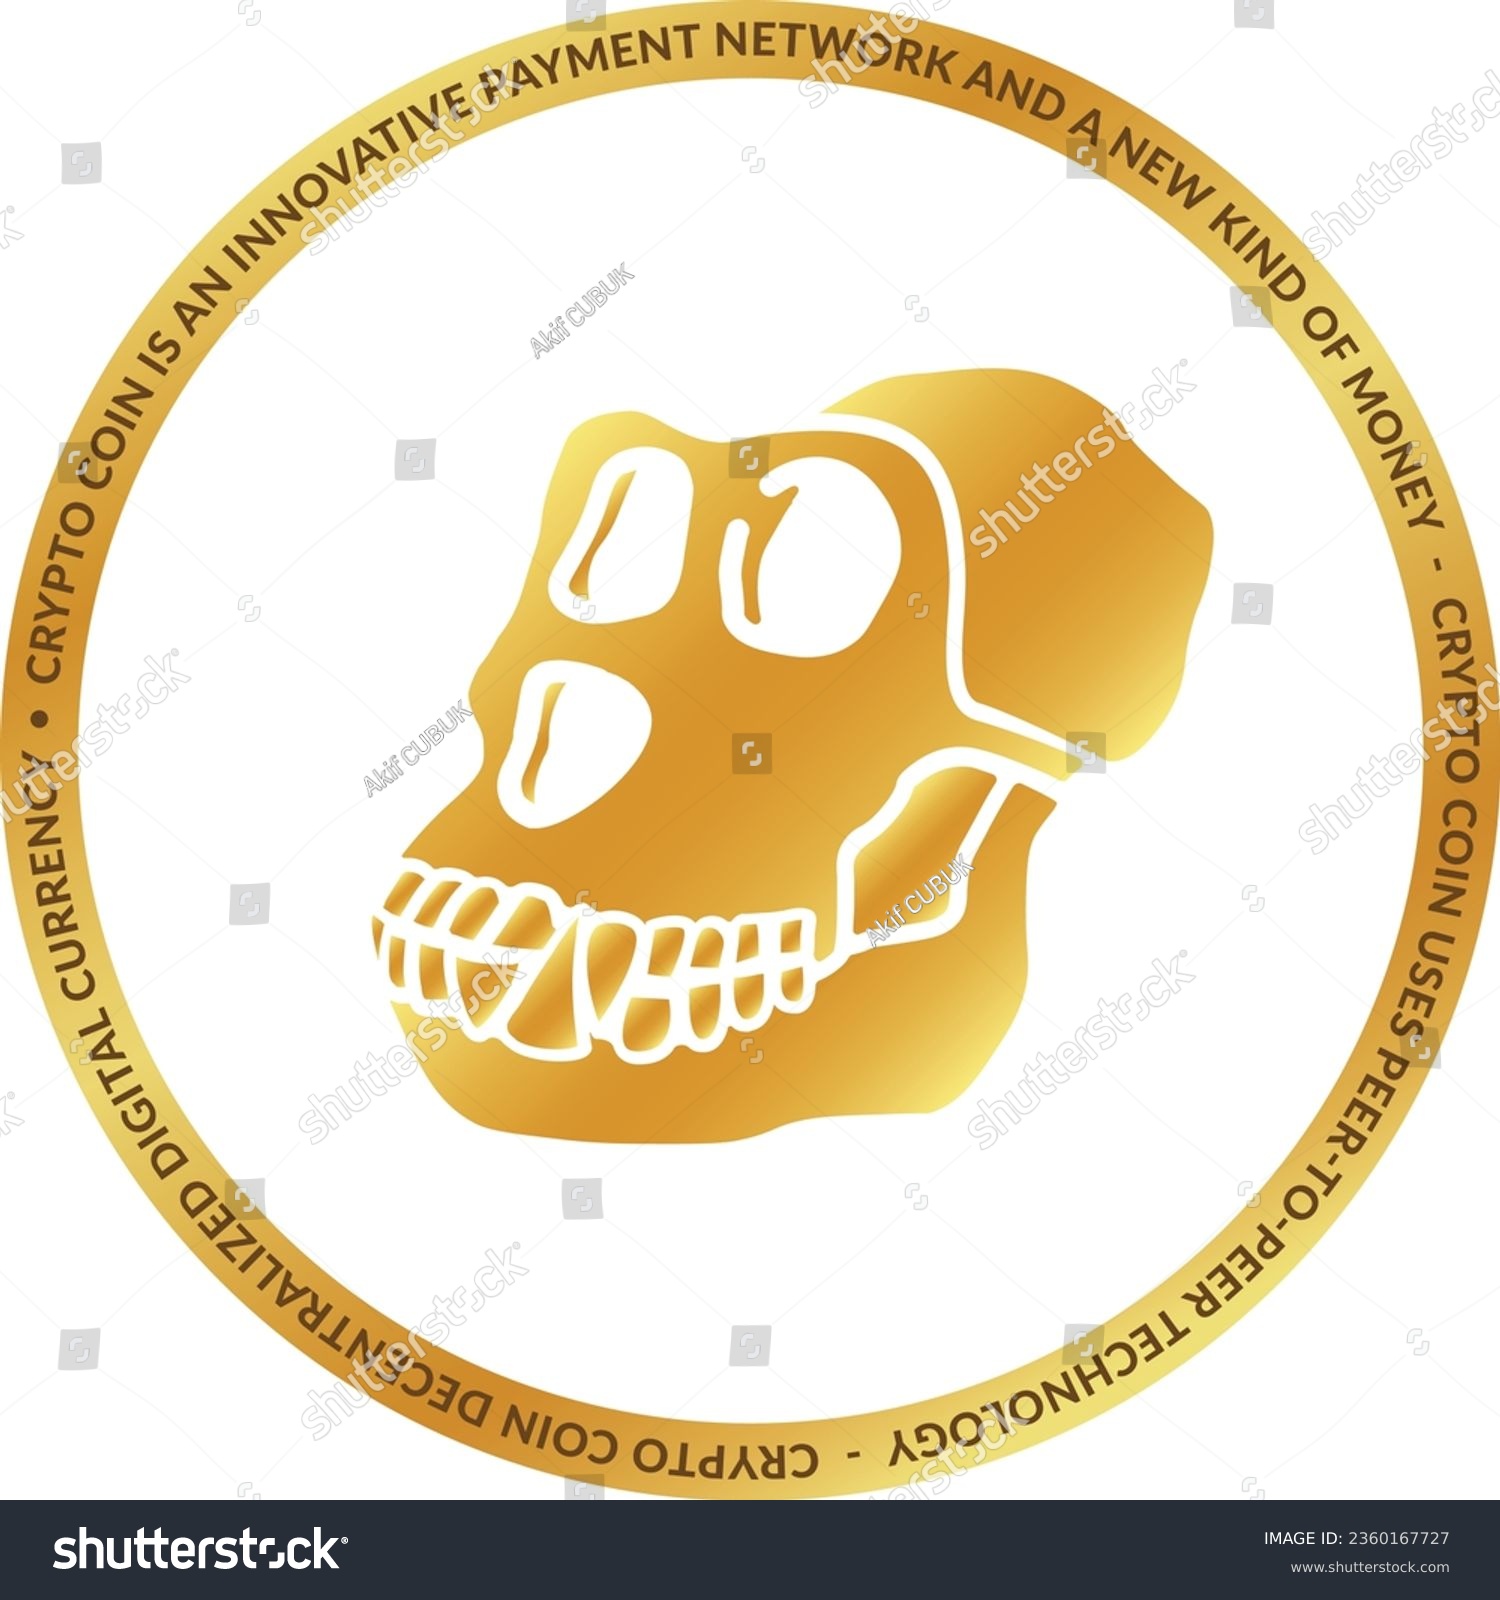 SVG of Vector illustrations of cryptocurrencies. ape cryptocurrency logo. 3d illustrations. svg